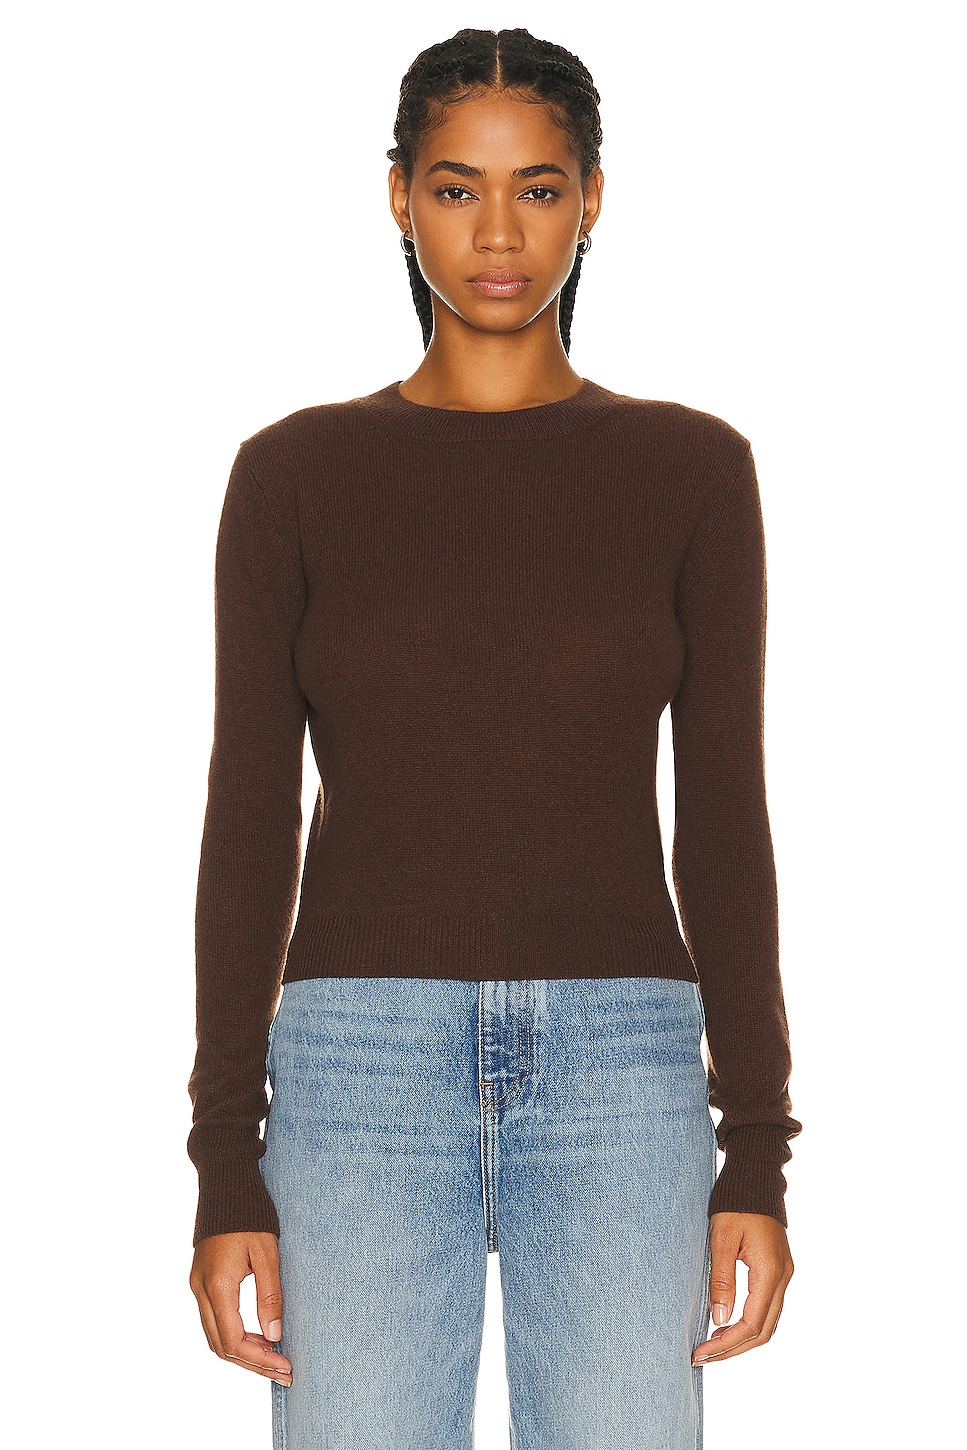 Image 1 of Eterne Francis Sweater in Chocolate